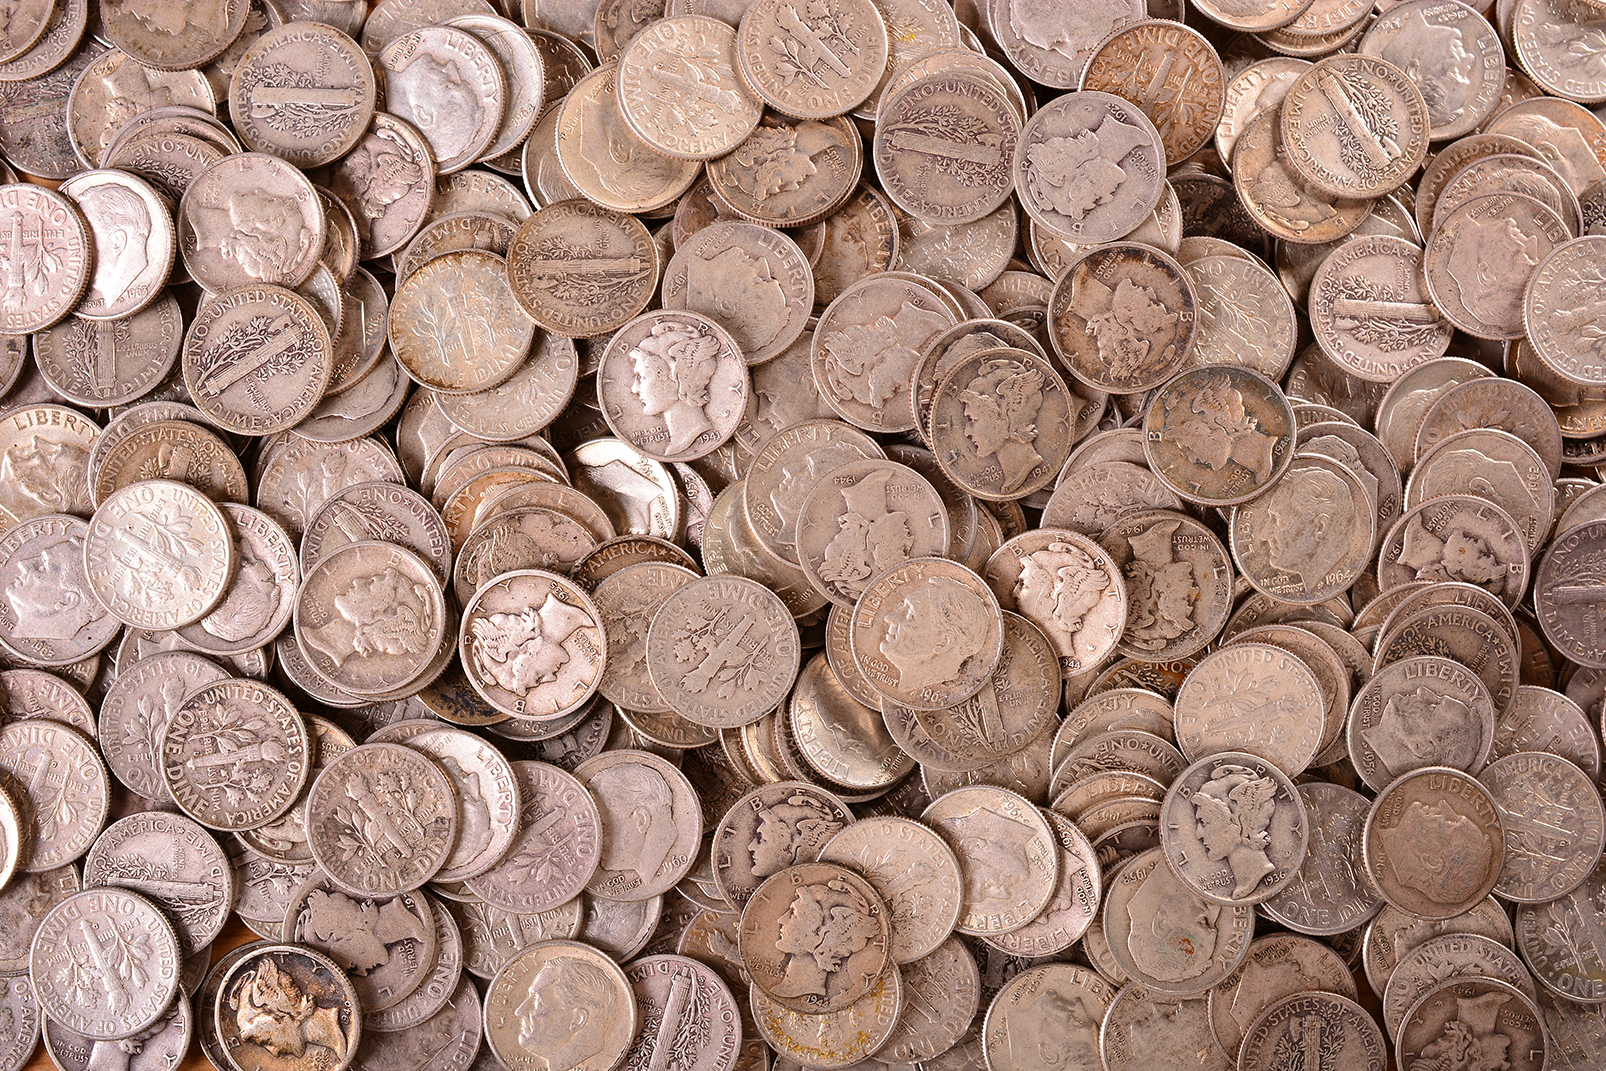 How to Sell Old Coins: The Complete Guide